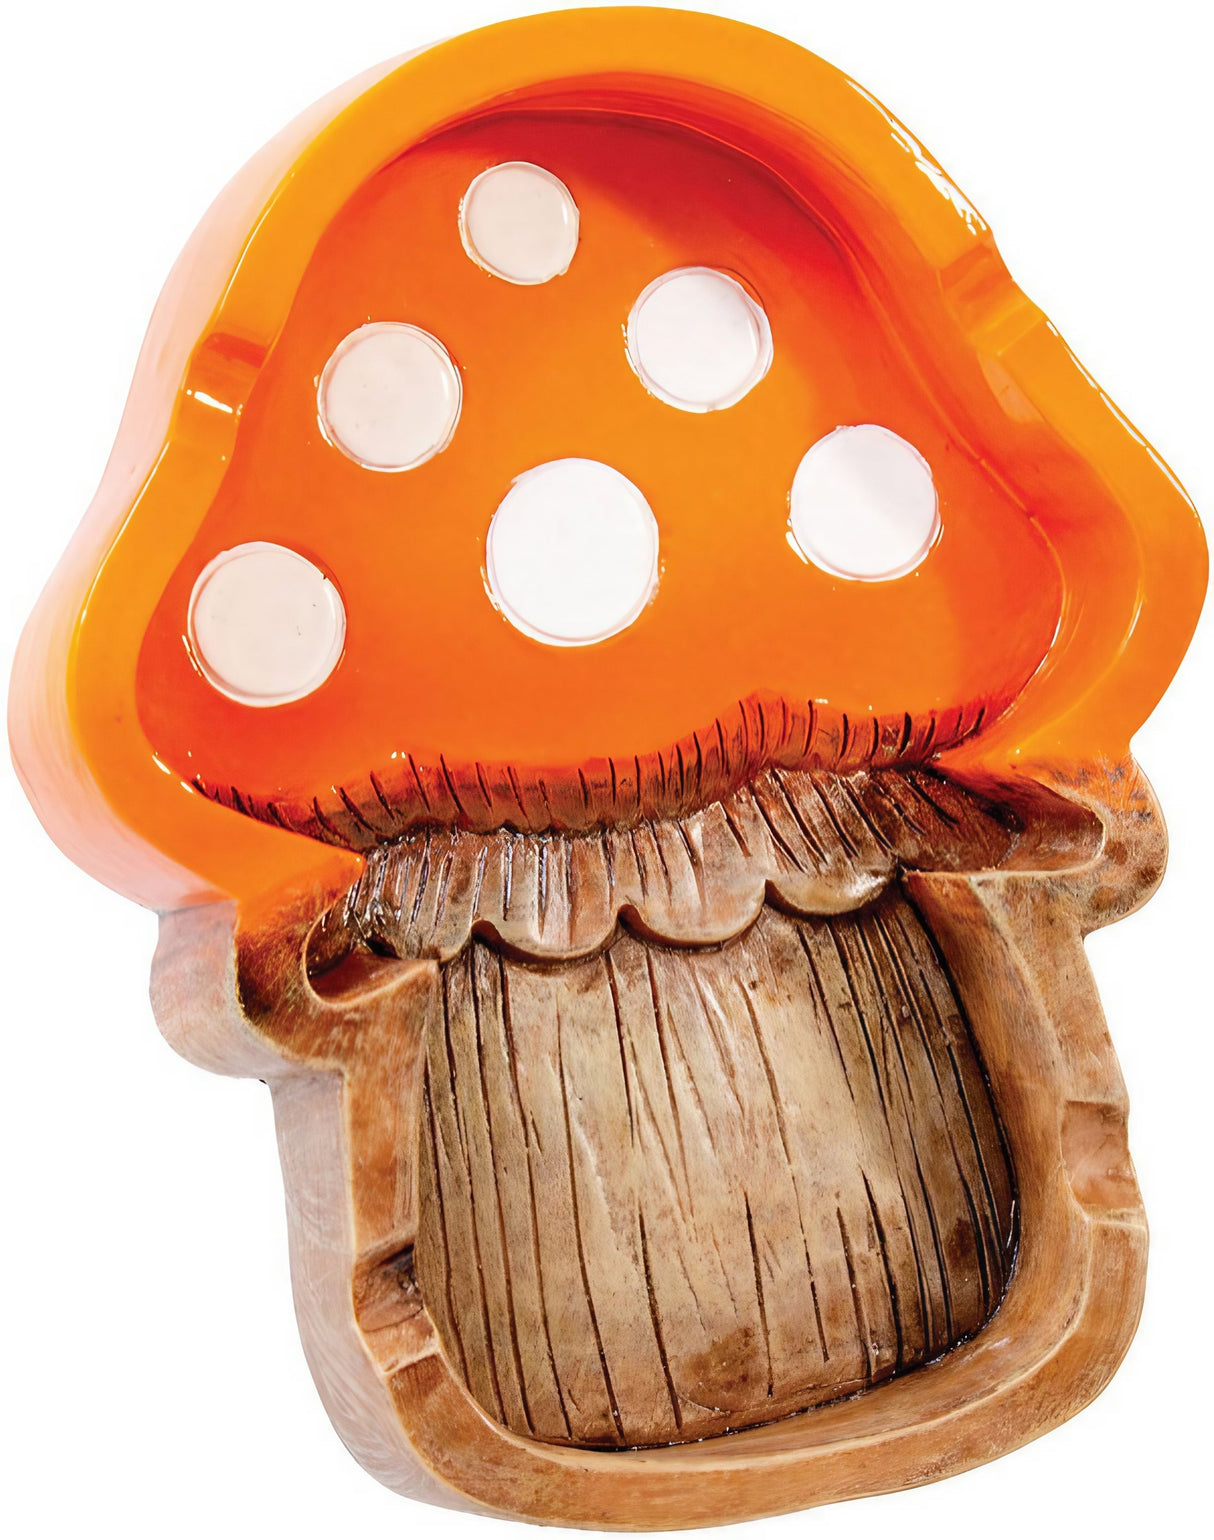 Fujima Polyresin Mushroom Ashtray in Assorted Colors, Front View, 4" x 5" Size, Heavy Wall Design